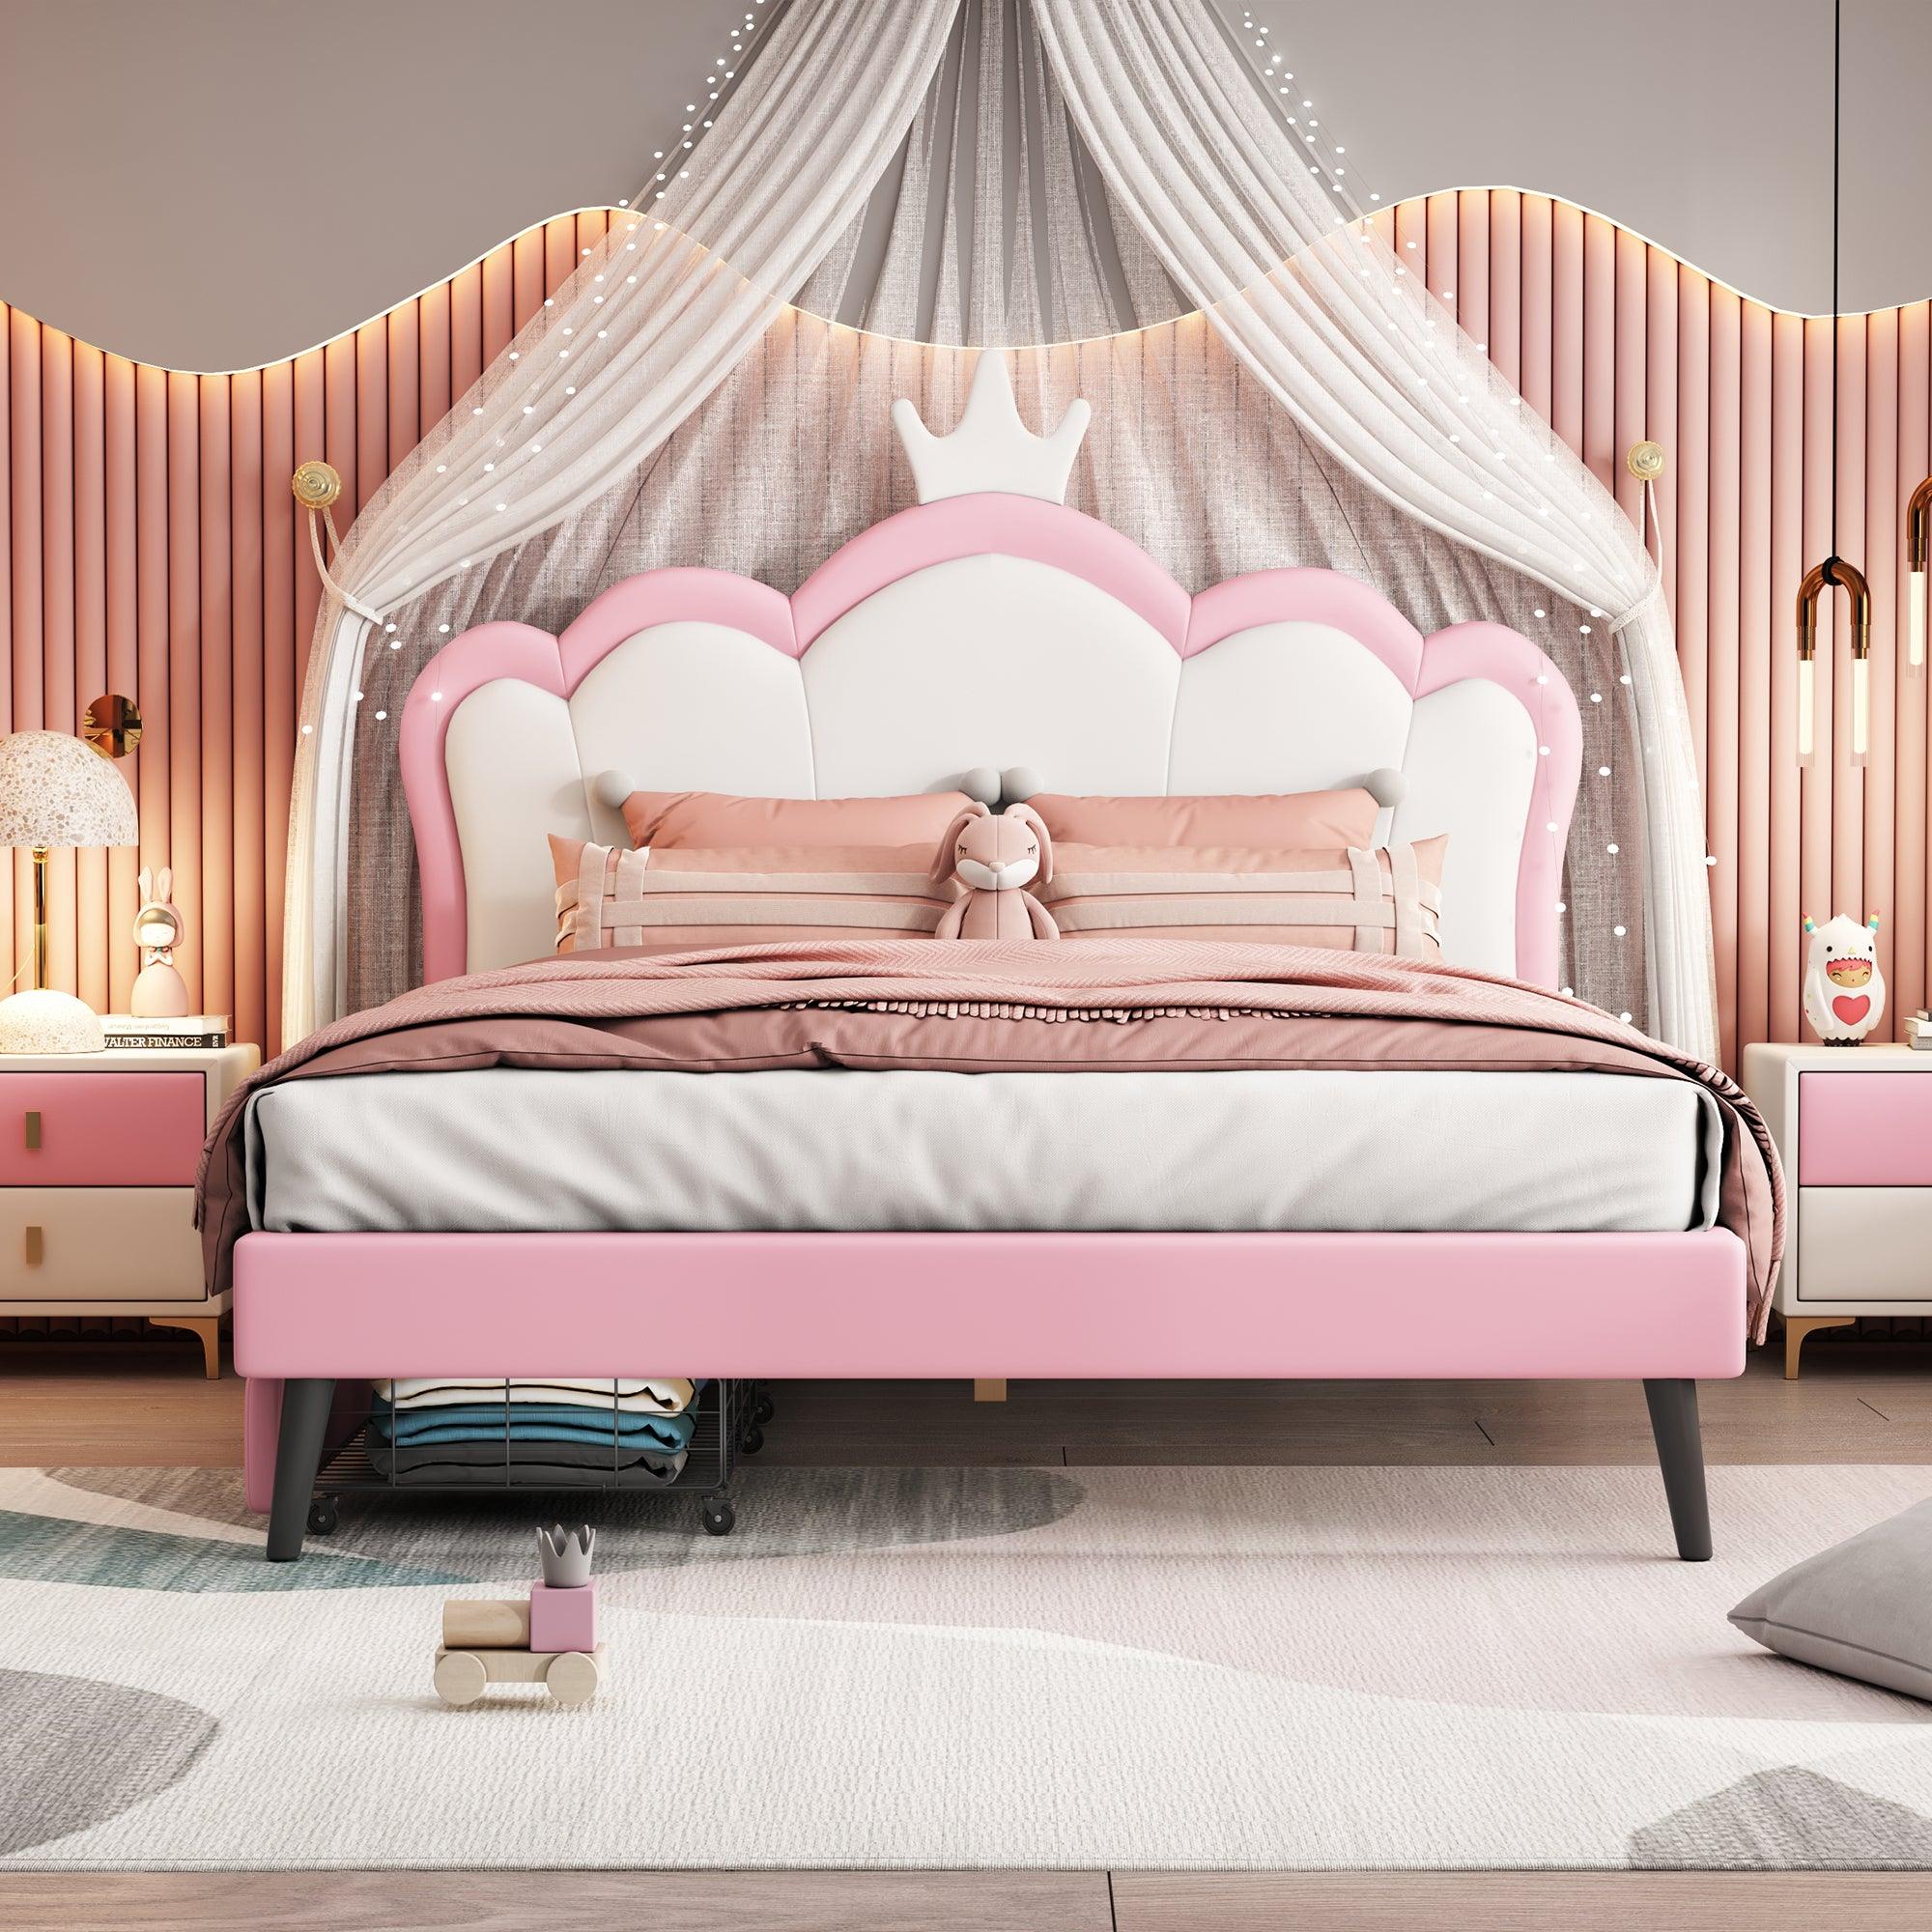 🆓🚛 Full Size Princess Bed With Crown Headboard & 2 Drawers, Full Size Platform Bed With Headboard & Footboard, White & Pink